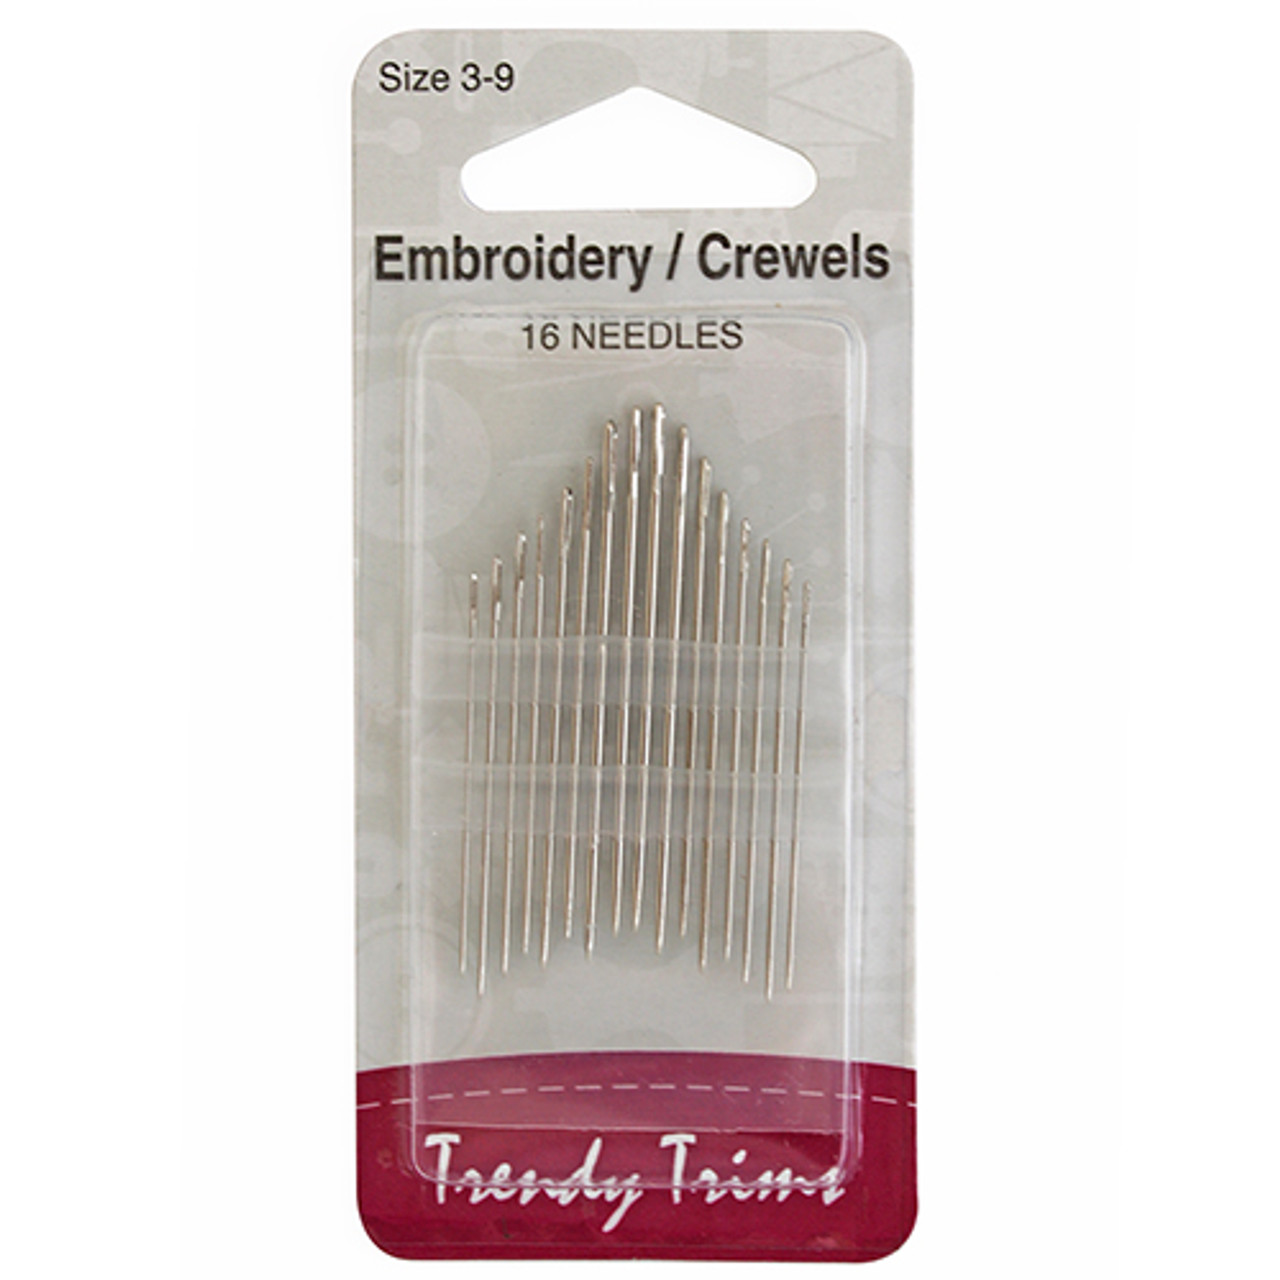 Needles Embroidery/Crewels x 16